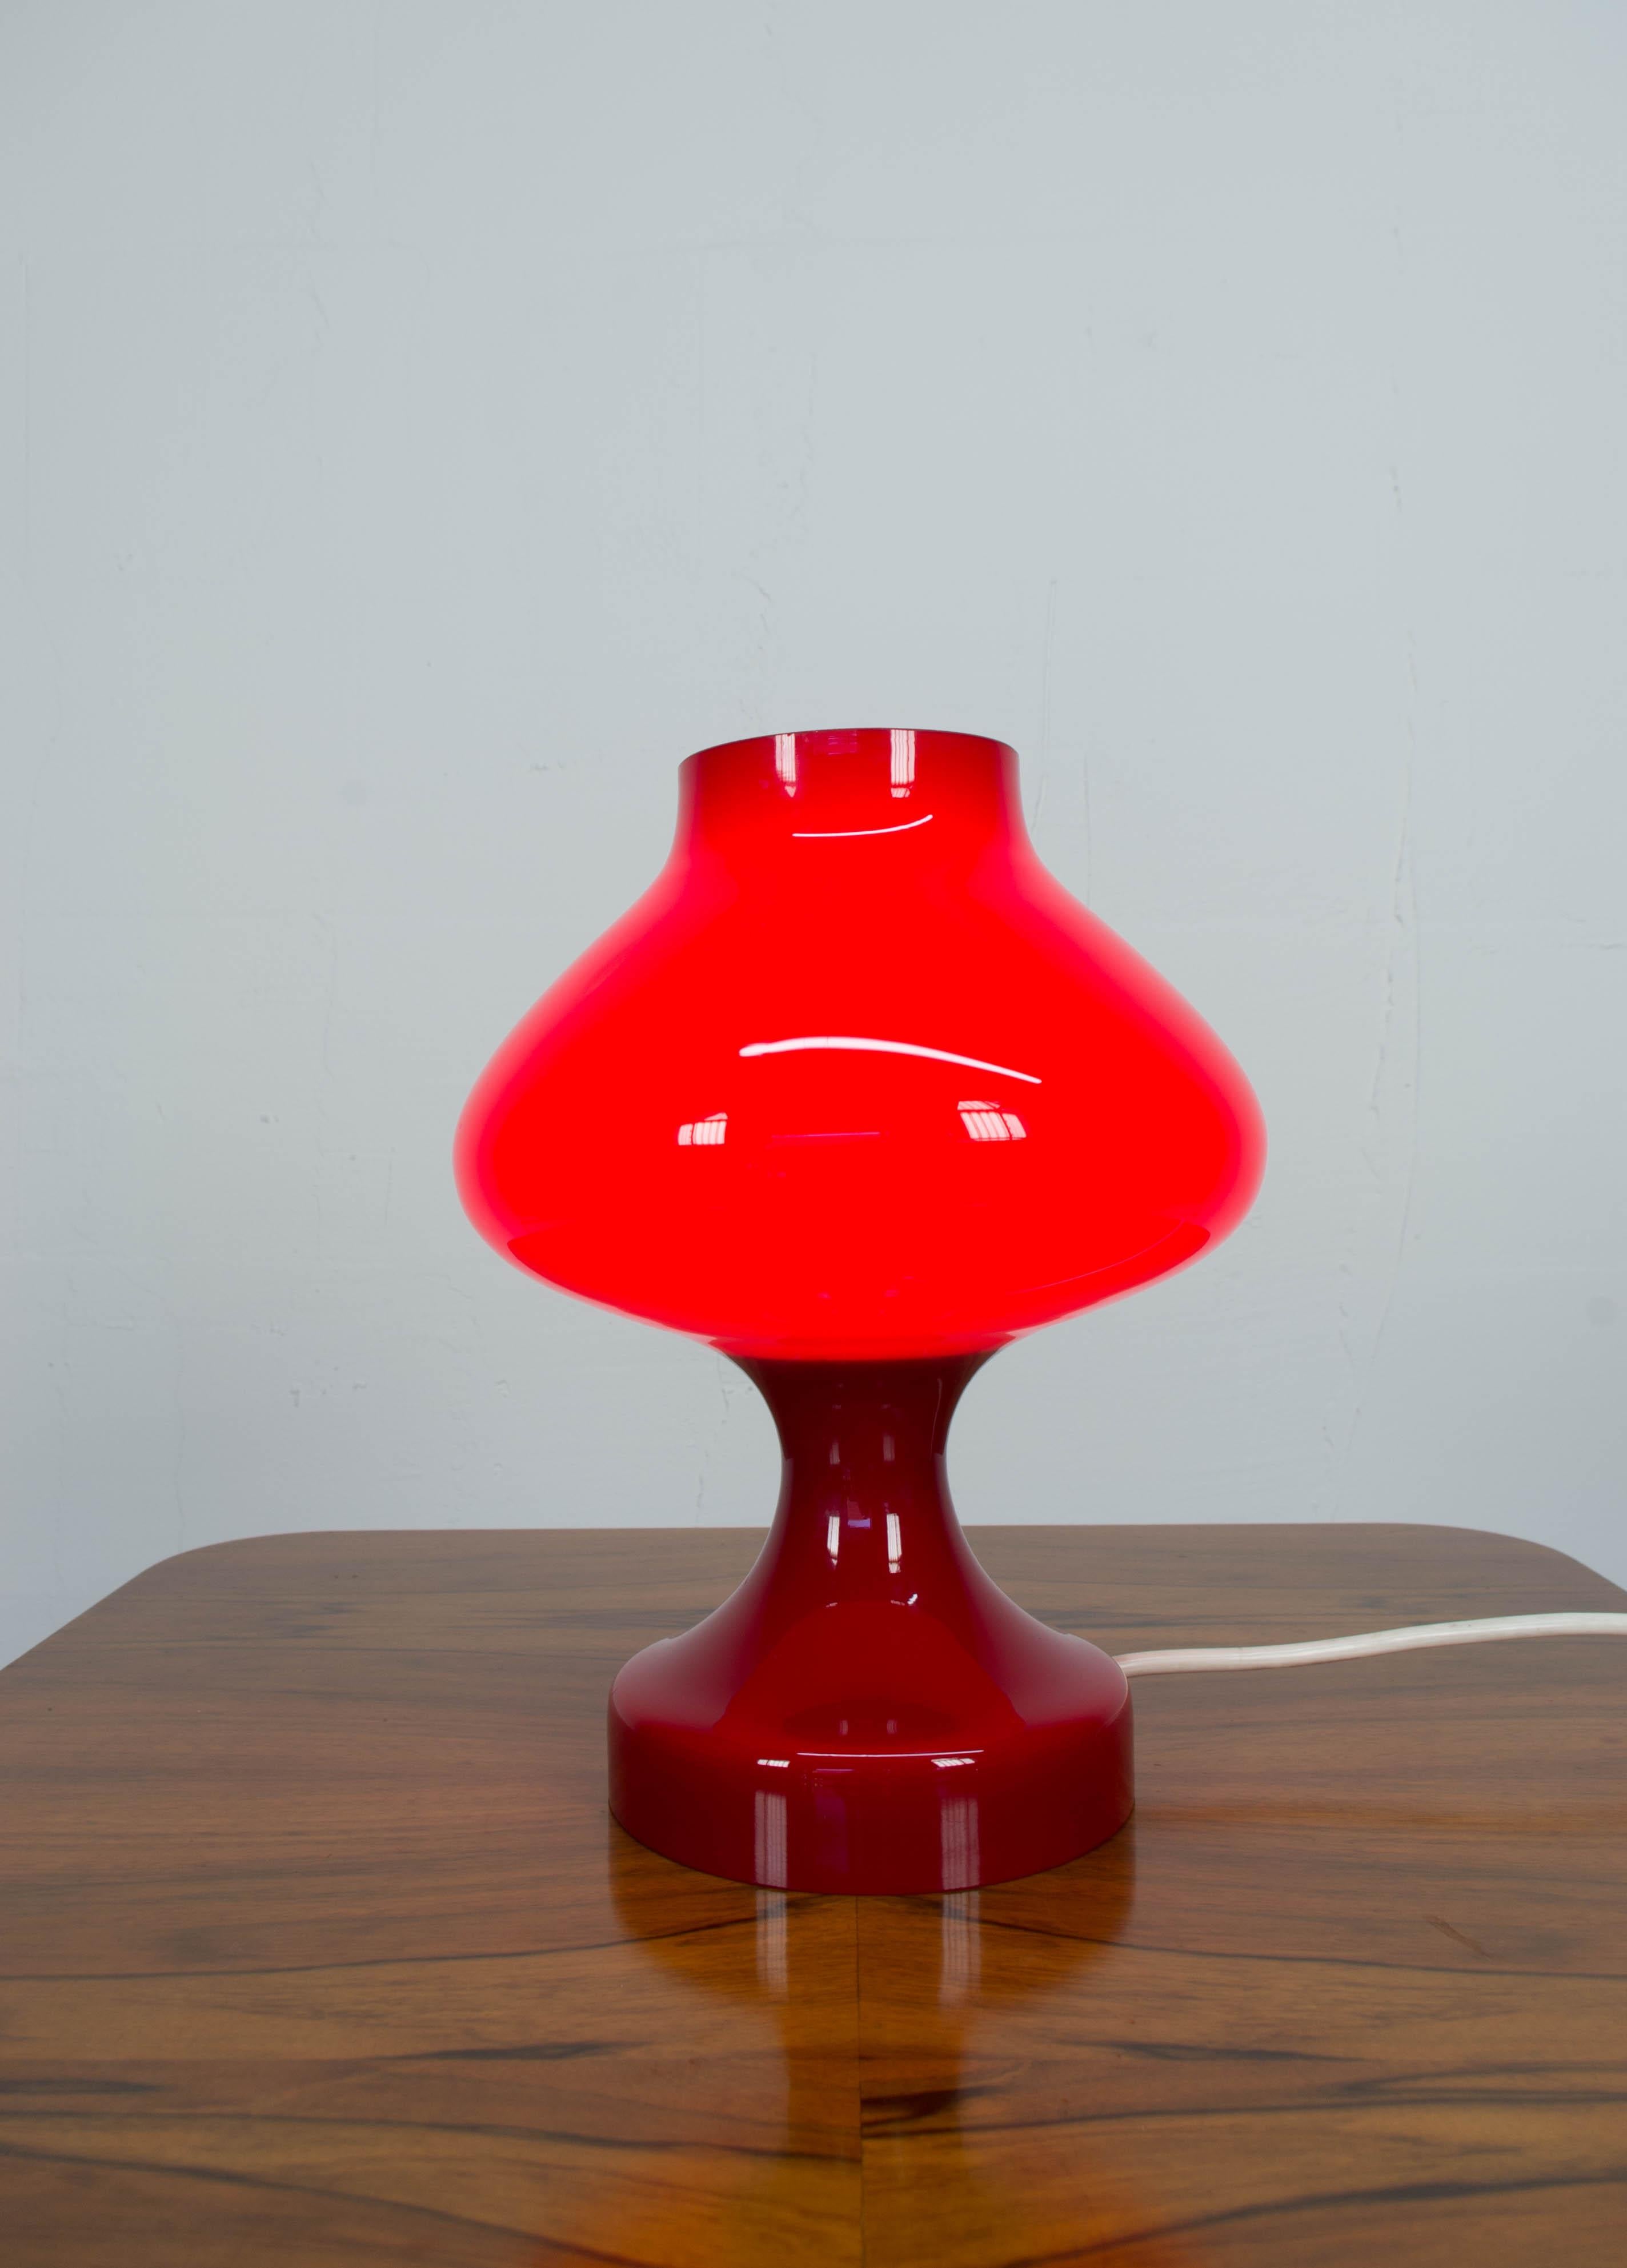 Glass table lamp designed by Stepan Tabera for Czechoslovakian company OPP Jihlava in early 1970s. Two layers of glass - white inside and red outside. 220V, E27. Very good condition, no defects on glass.